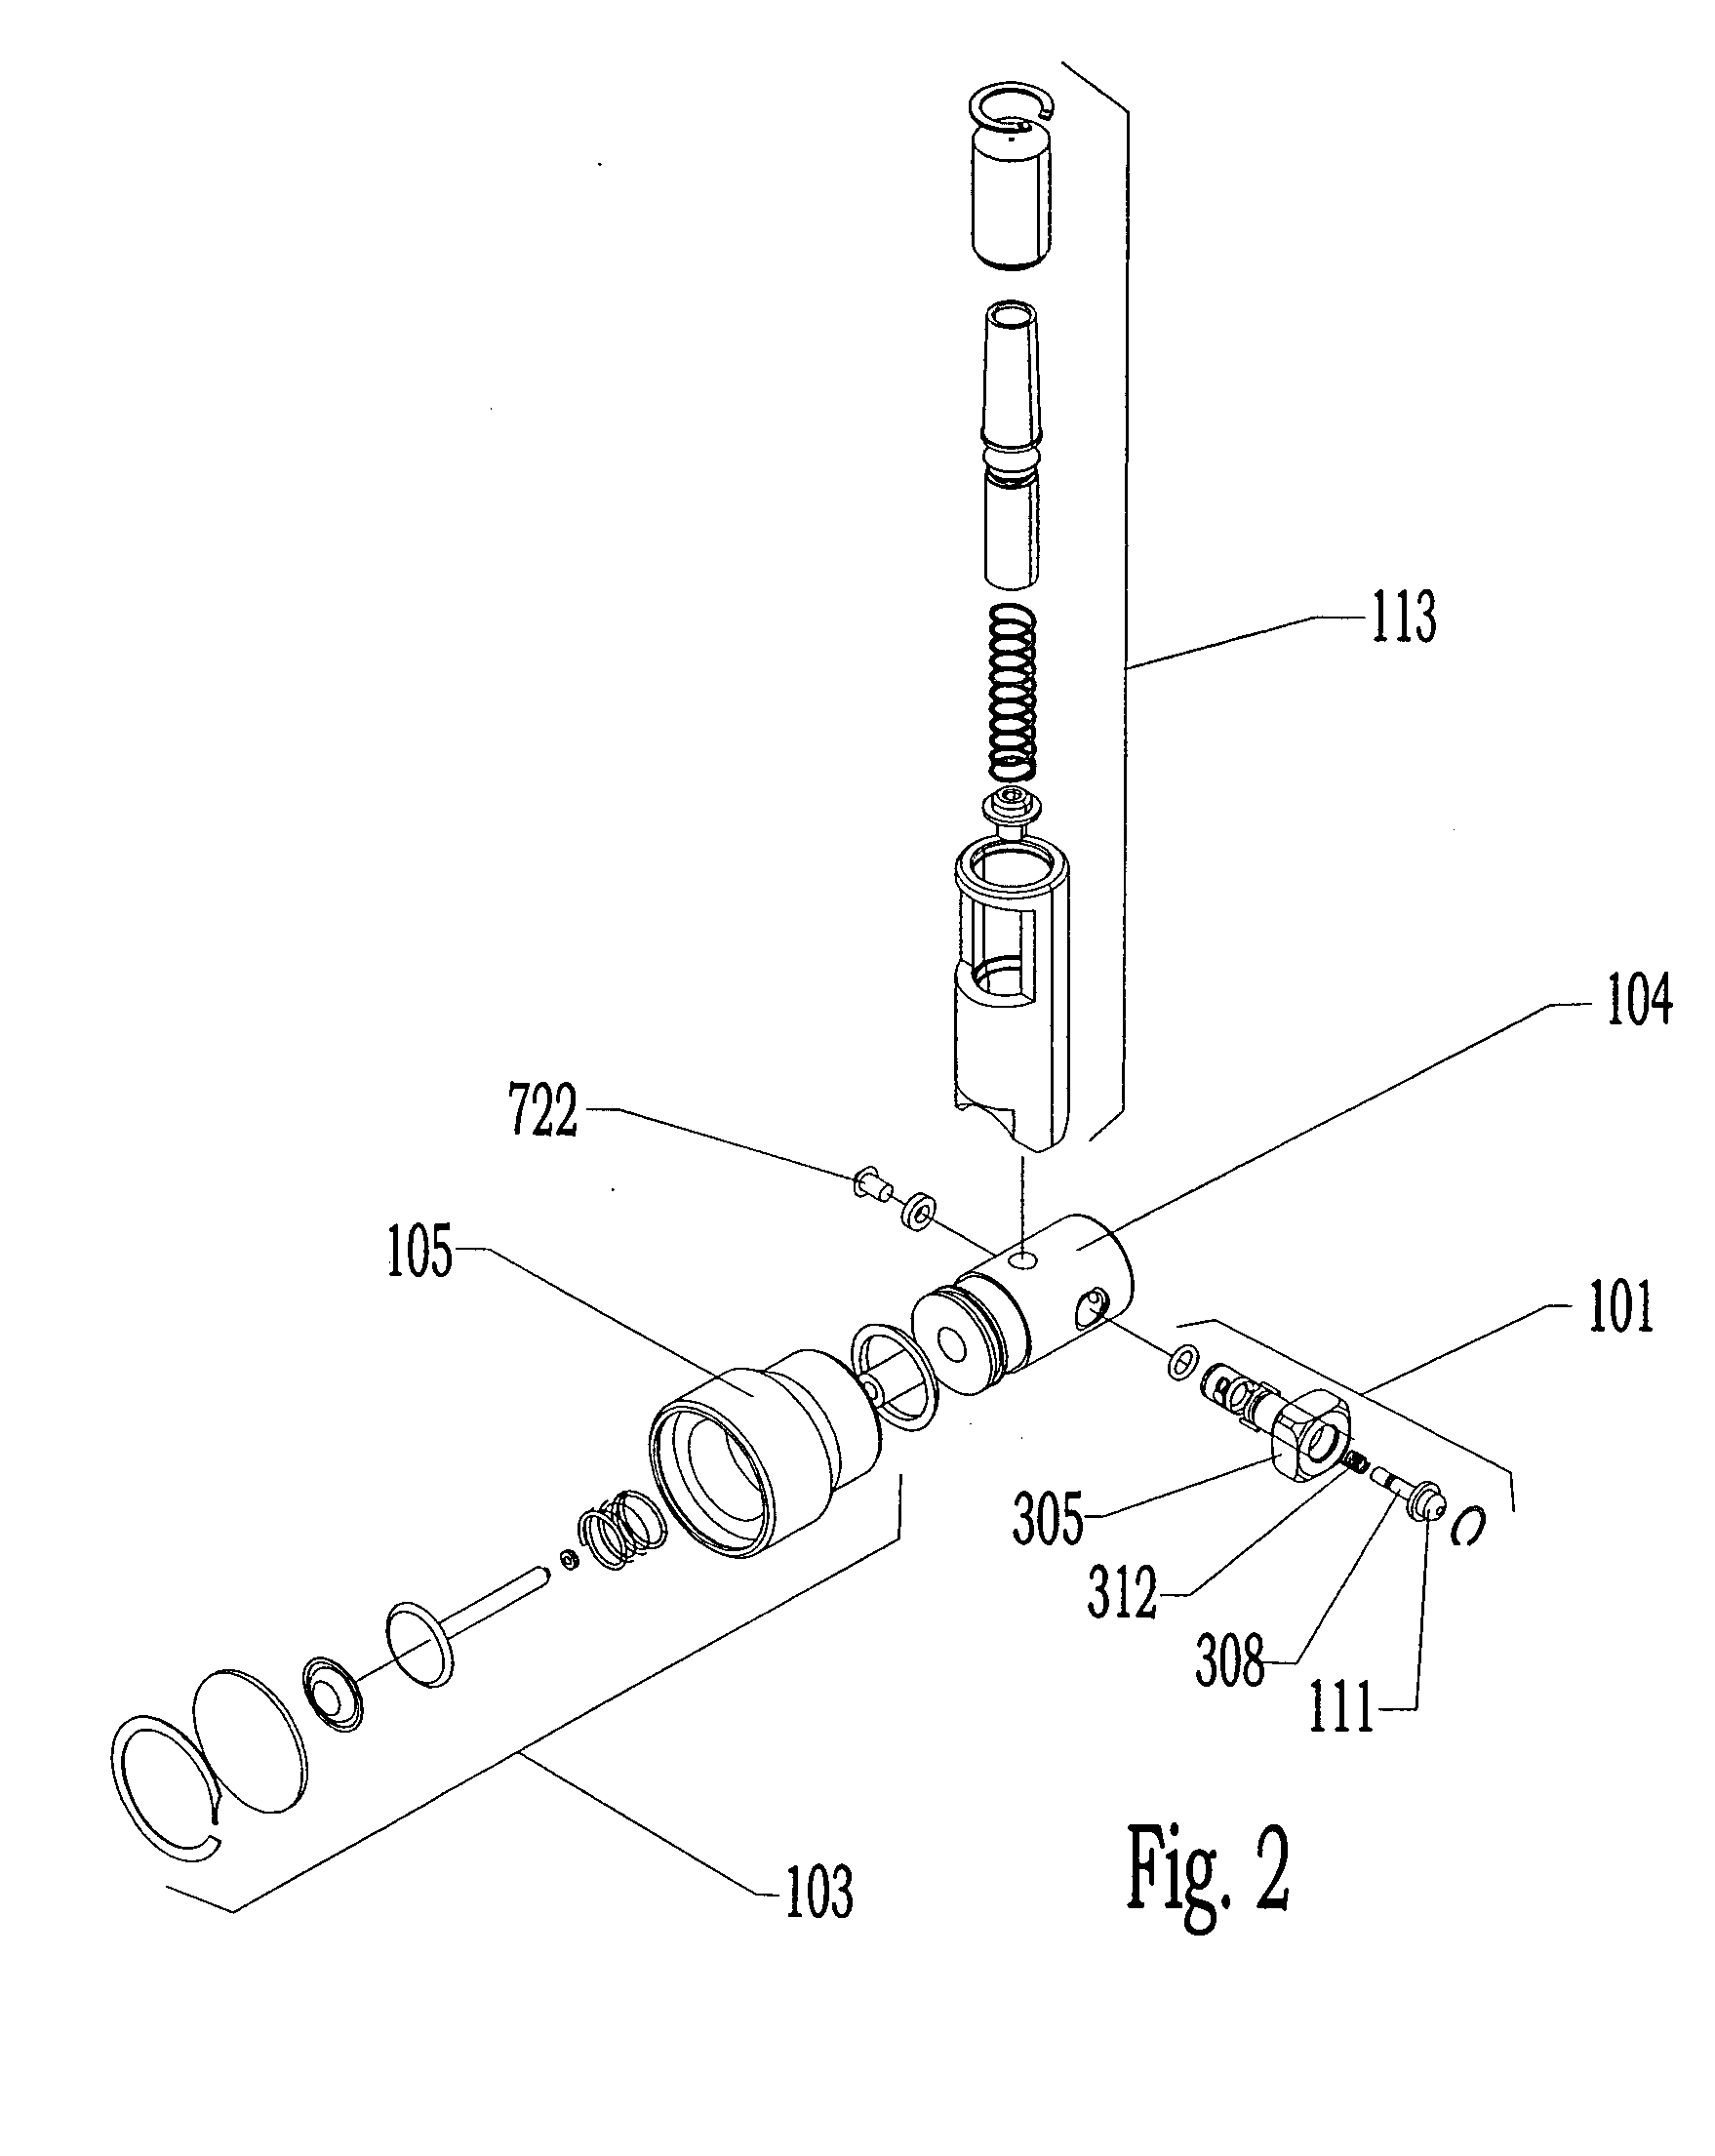 Suction control apparatus and methods for maintaining fluid flow without compromising sterile lines